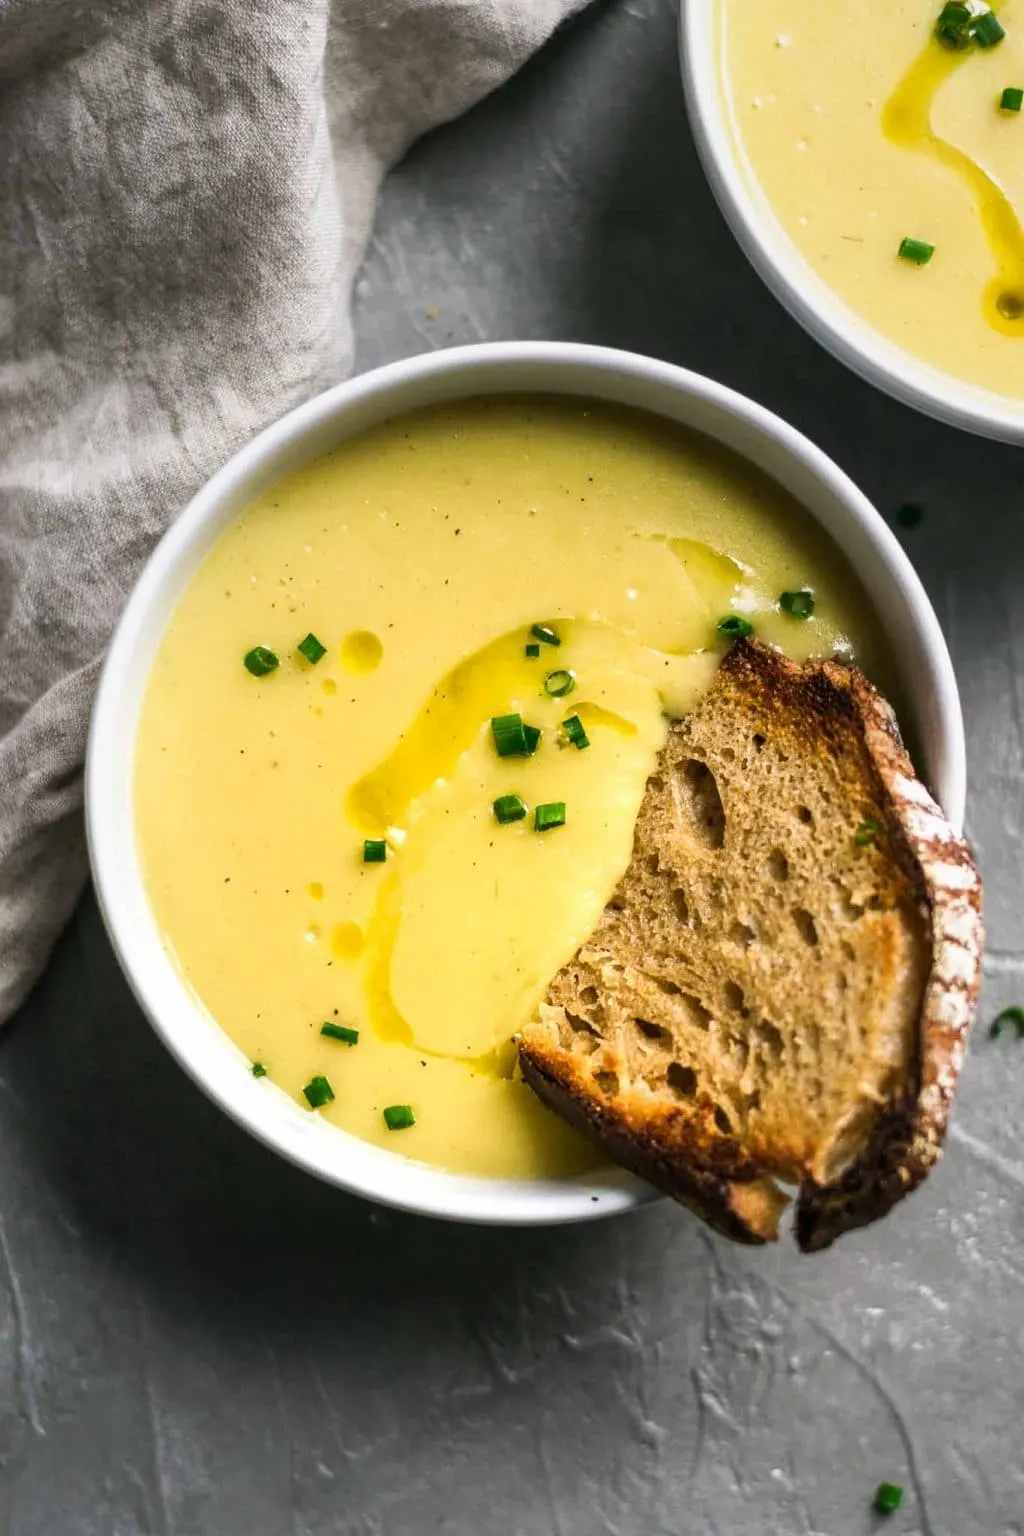 Vegan potato leek soup garnishes with a swirl of olive oil and minced chives and served with garlic bread